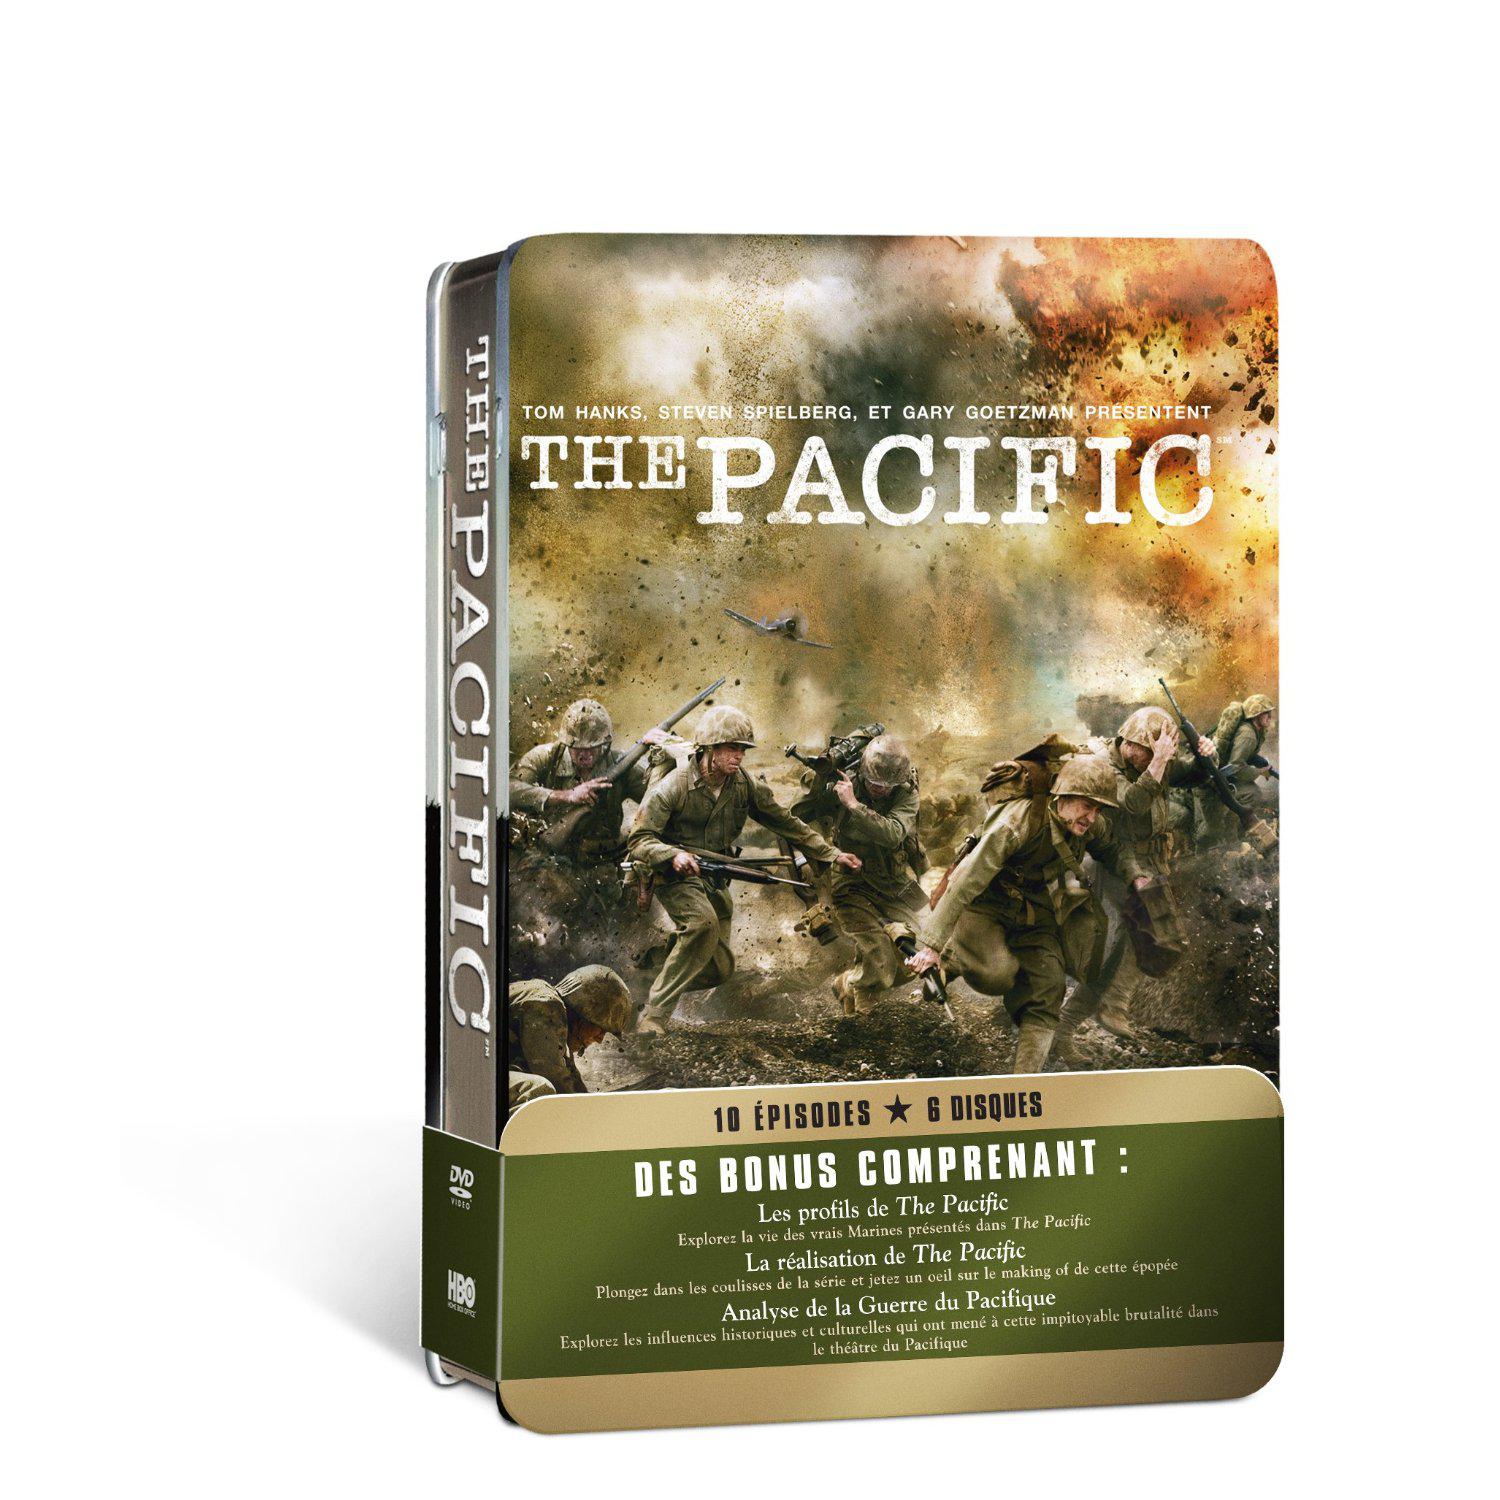 The Pacific : full metal coffret